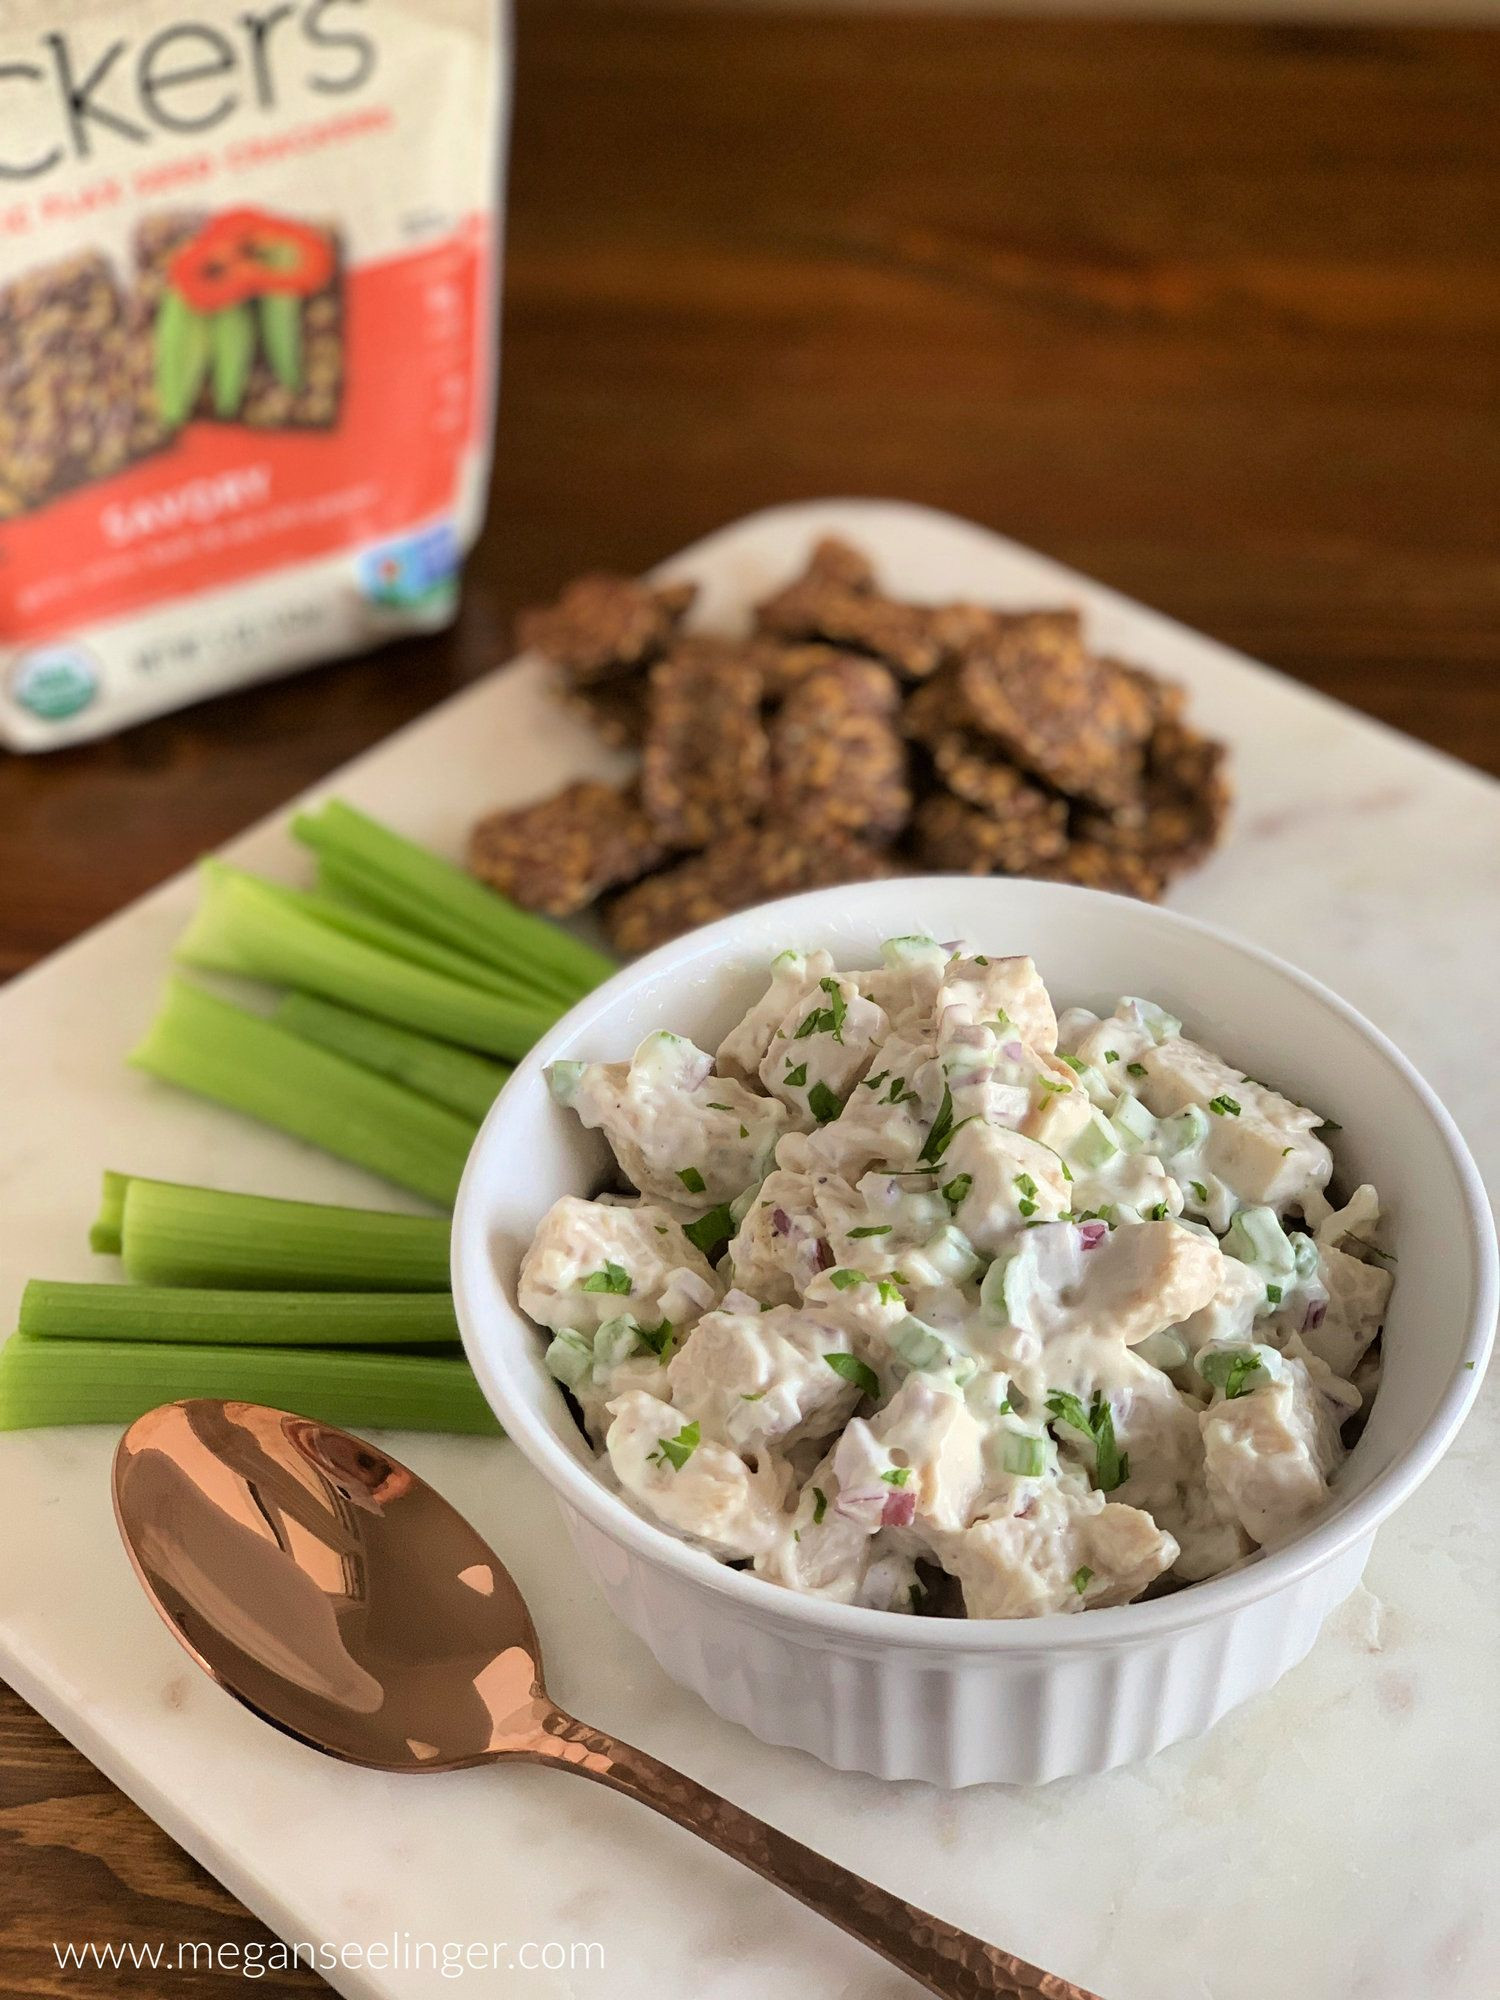 Canned Chicken Keto
 Keto Chicken Salad Rotisserie Canned And Leftover